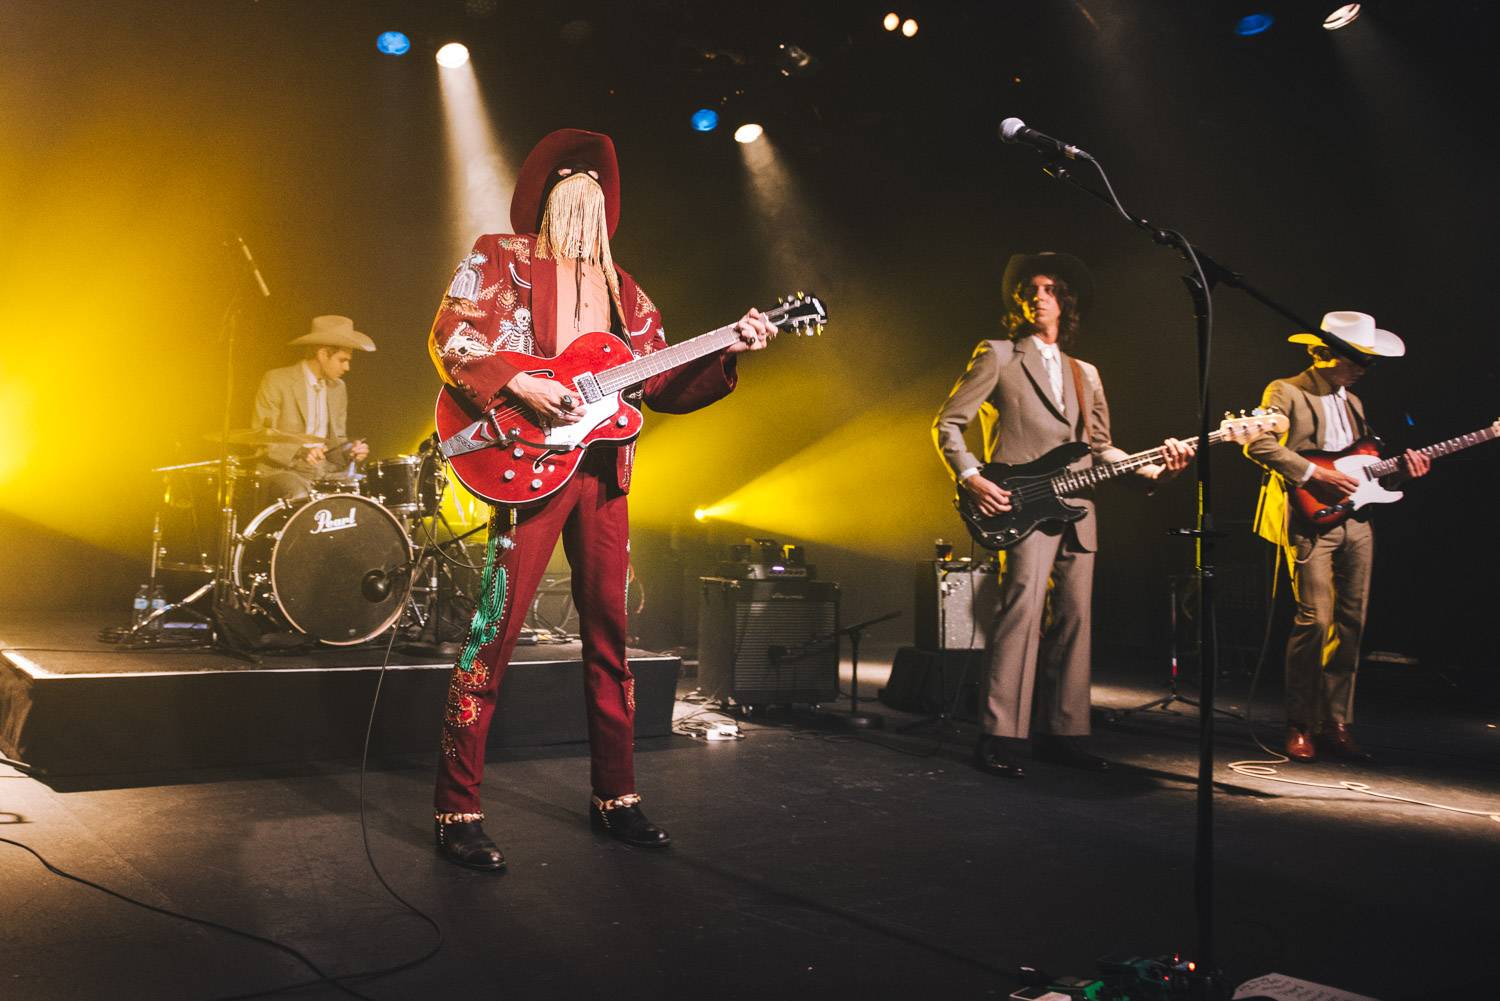 Orville Peck at the Commodore Ballroom, Vancouver, Aug 26 2019. Pavel Boiko photo.